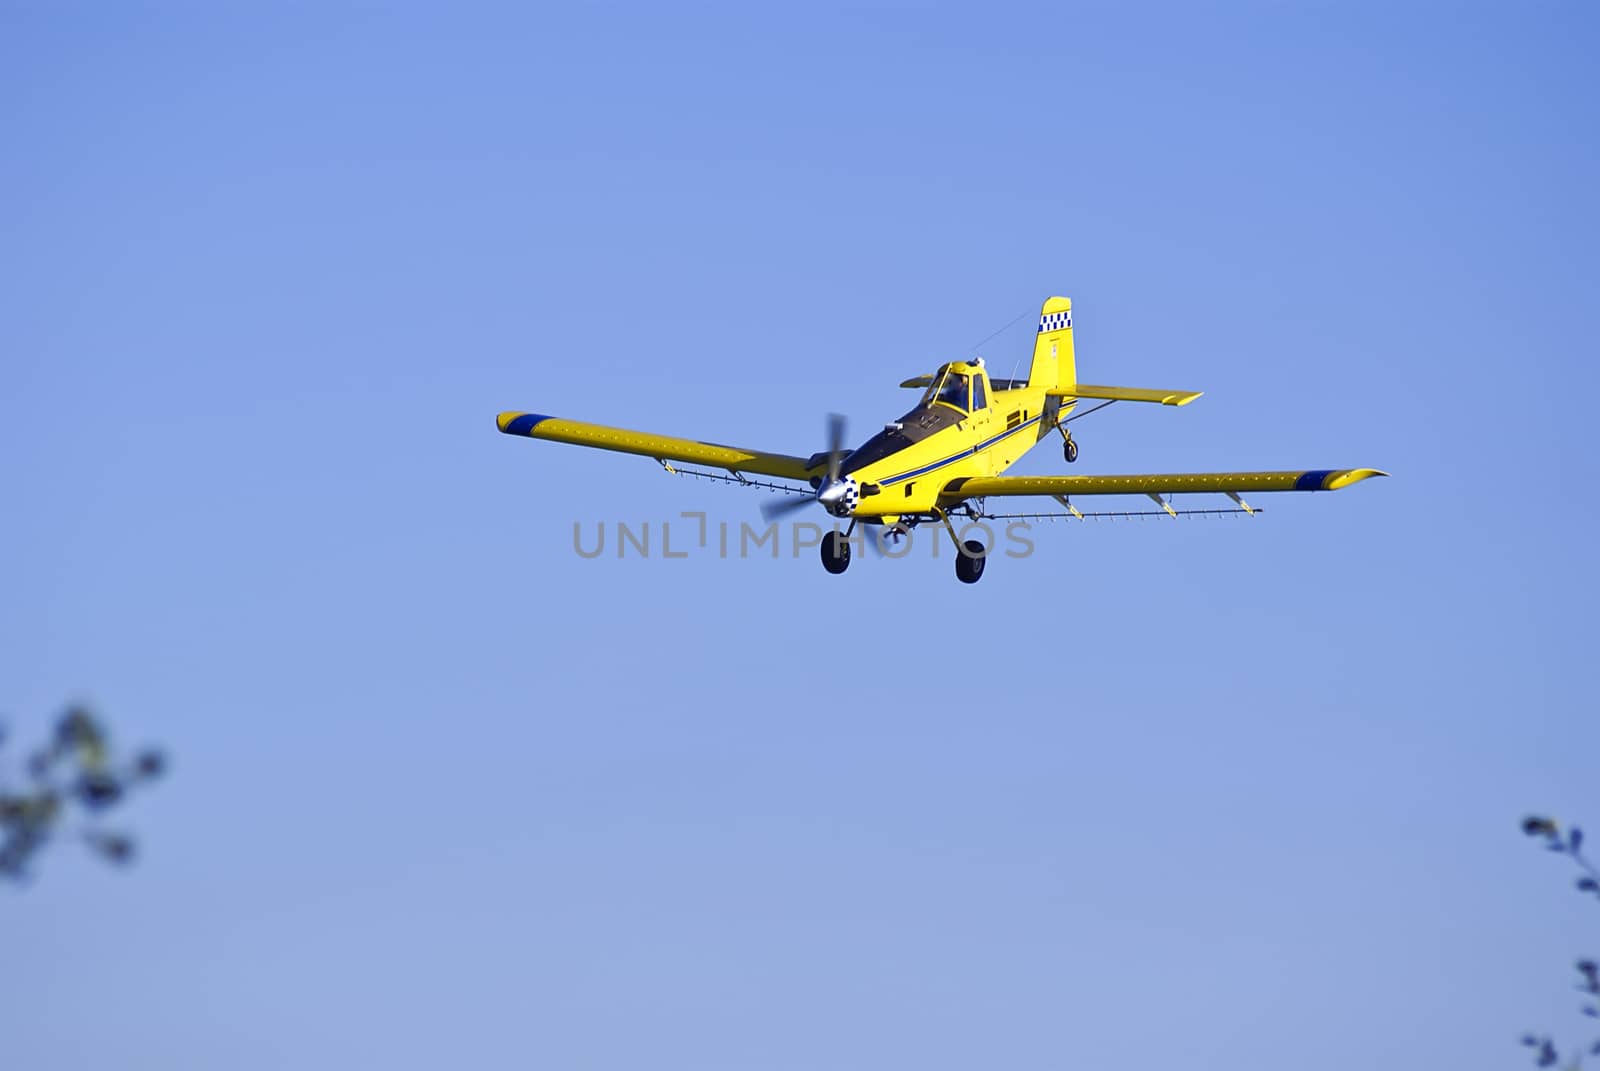 Crop-duster coming in for another pass at a cornfield while spraying the crop.